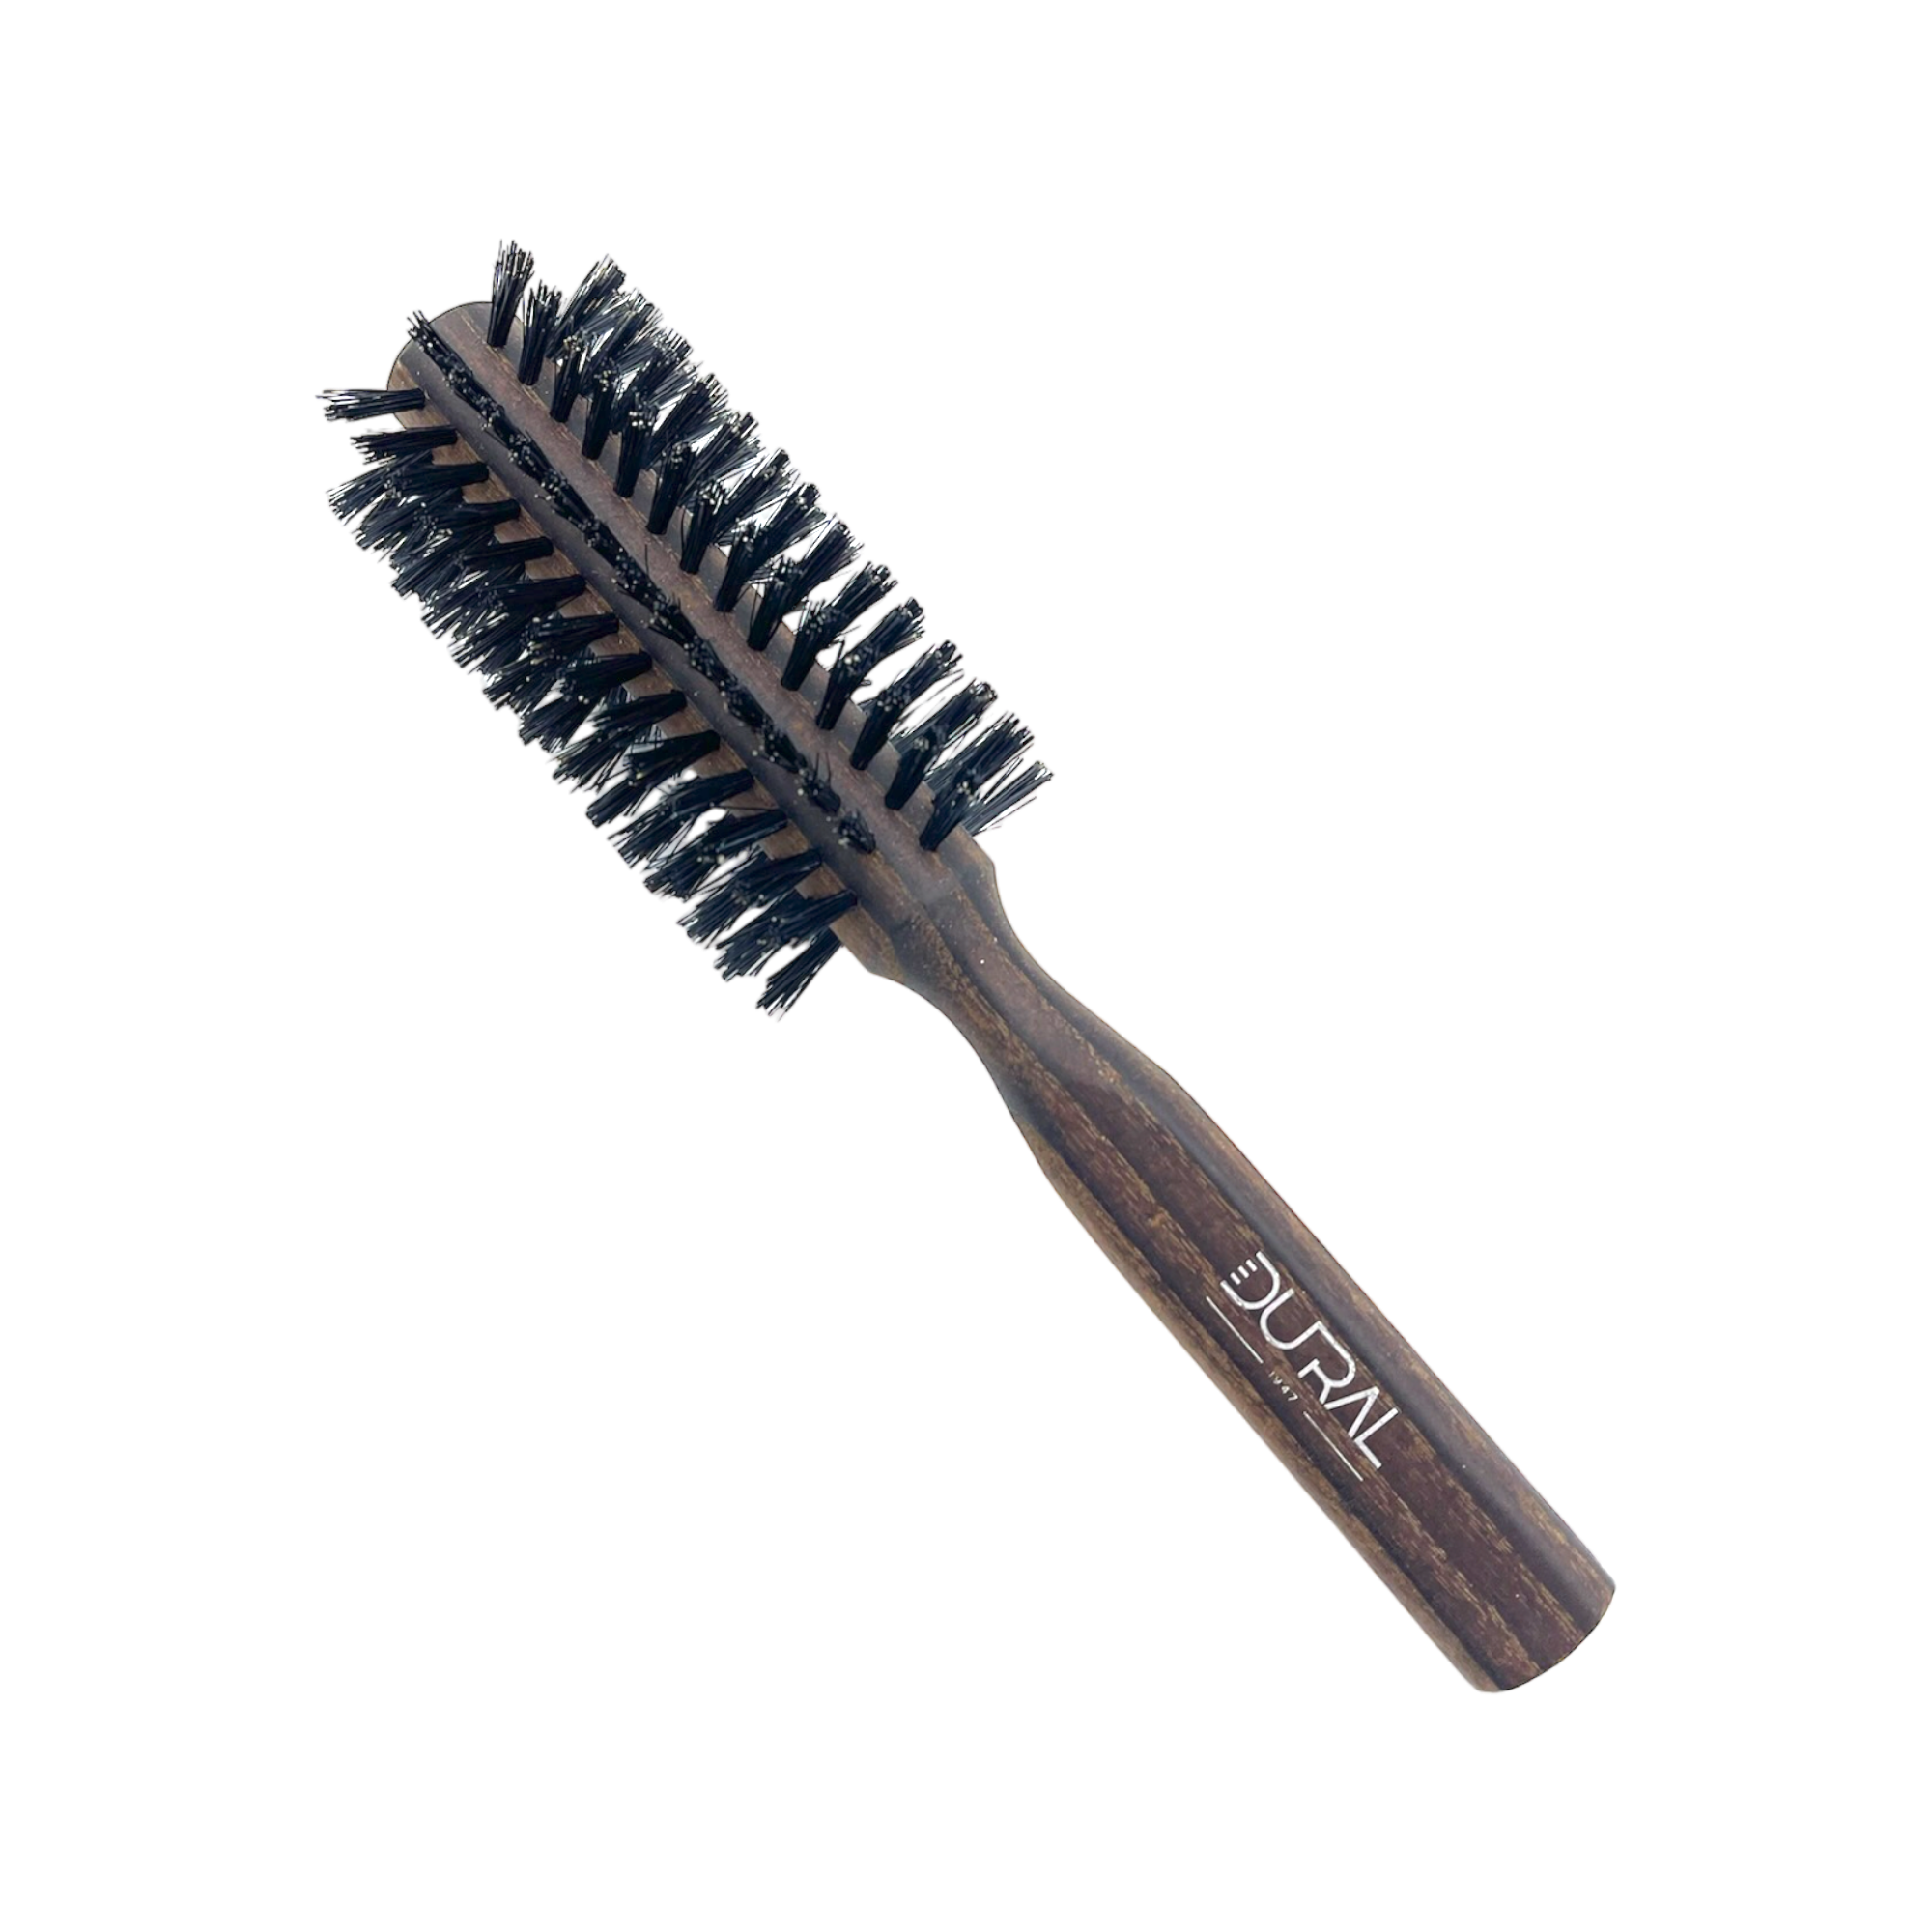 Dural Thermo Ash Wood 10 rows round hair brush with boar bristles